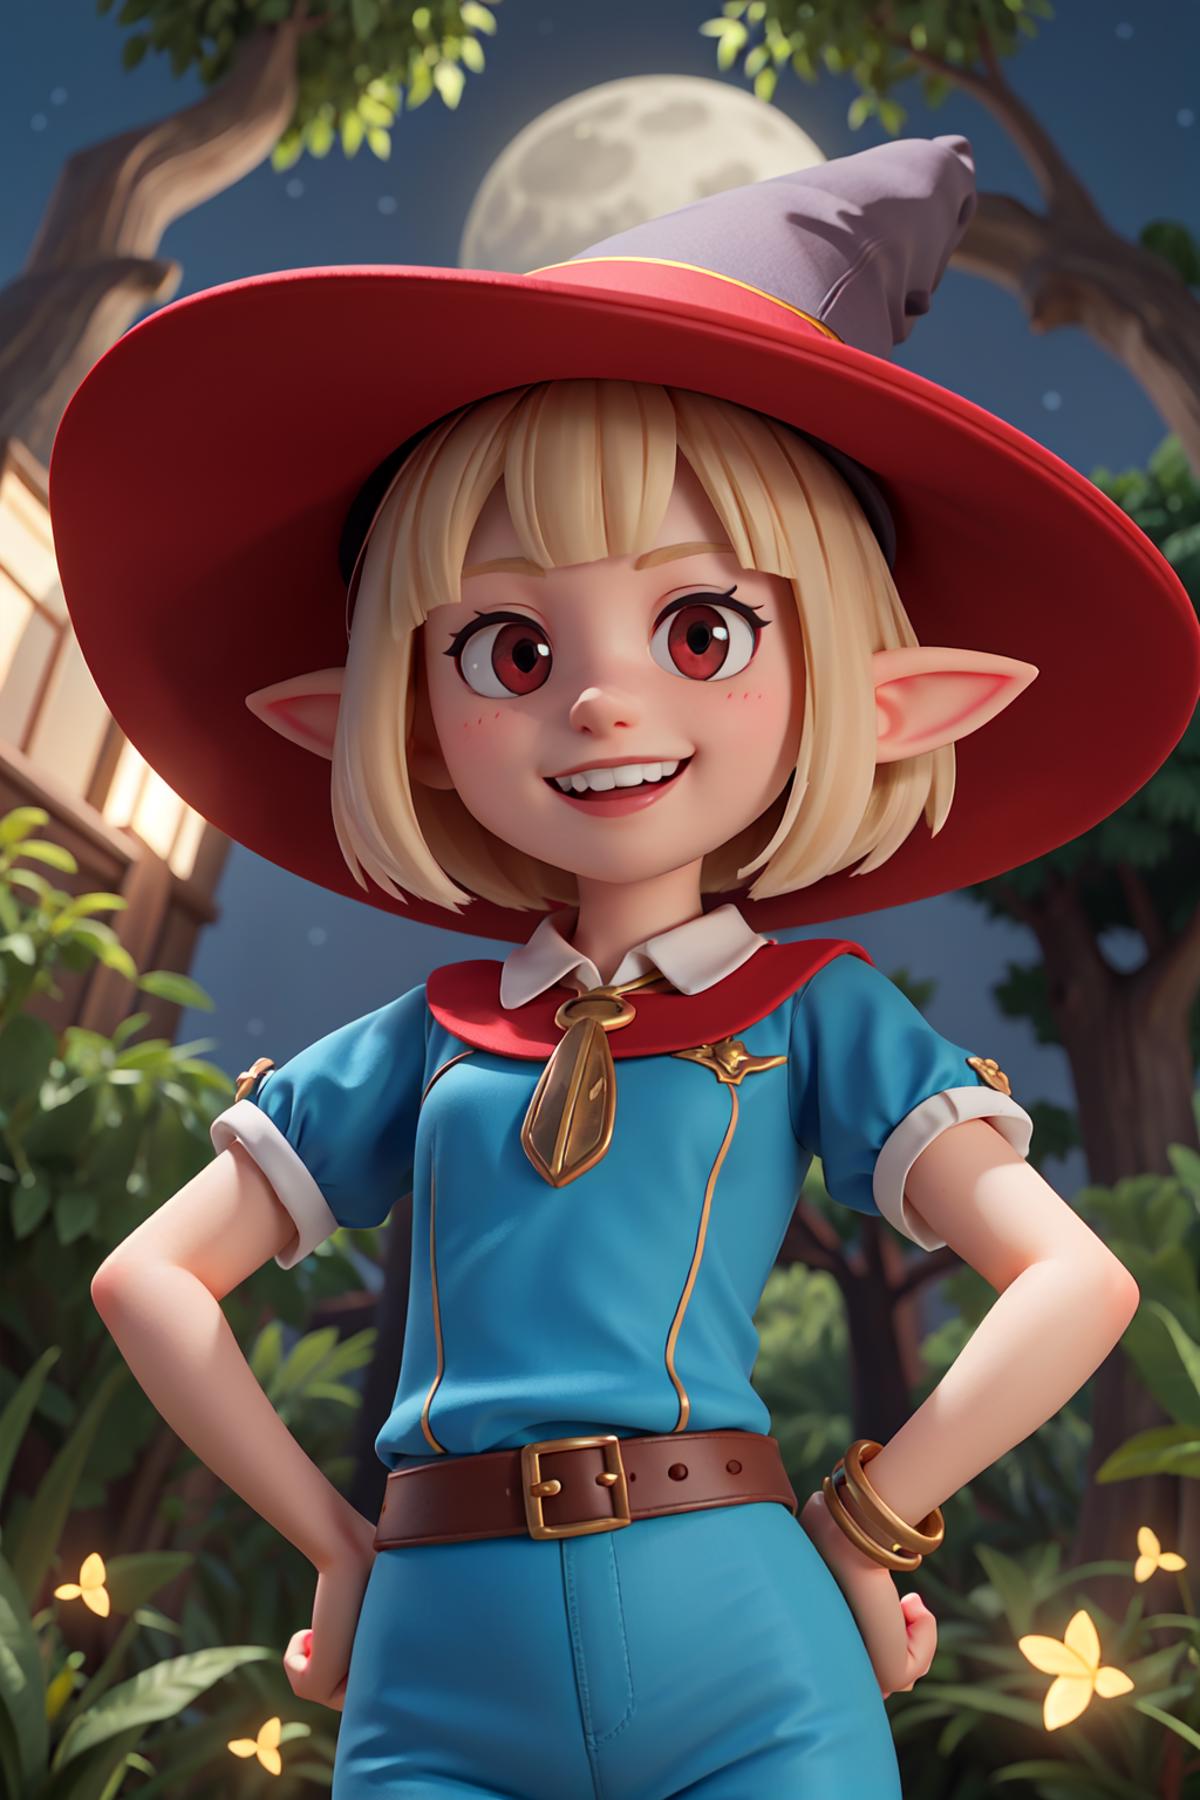 A cartoon girl with blonde hair wearing a blue shirt and a red hat.